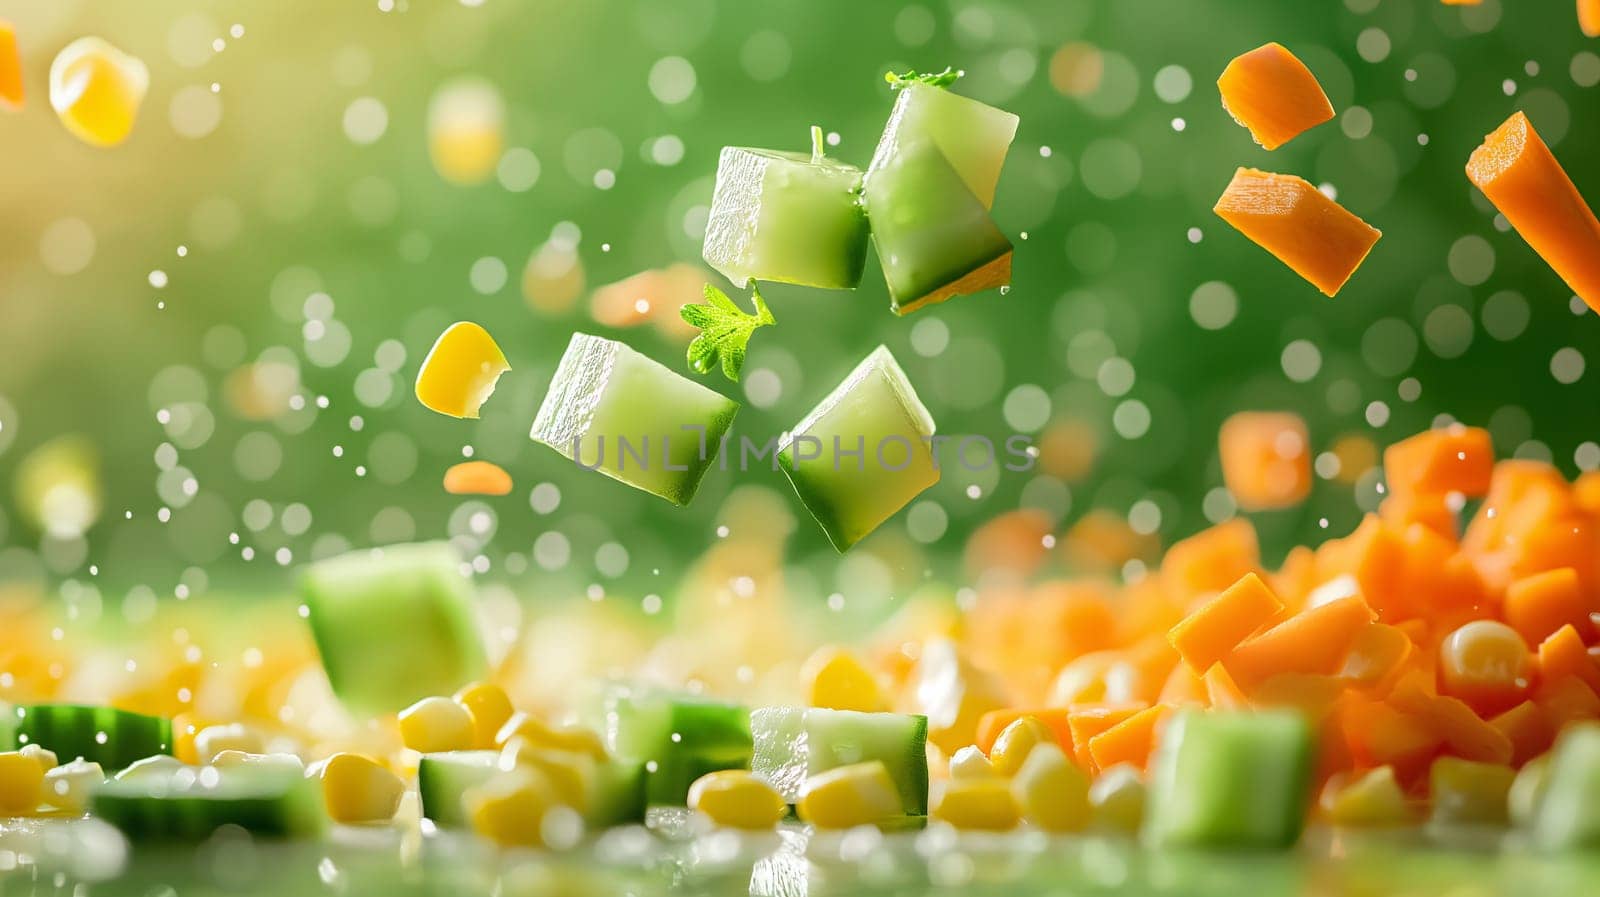 Fresh Chopped Vegetables in Mid-Air With Water Drops by chrisroll